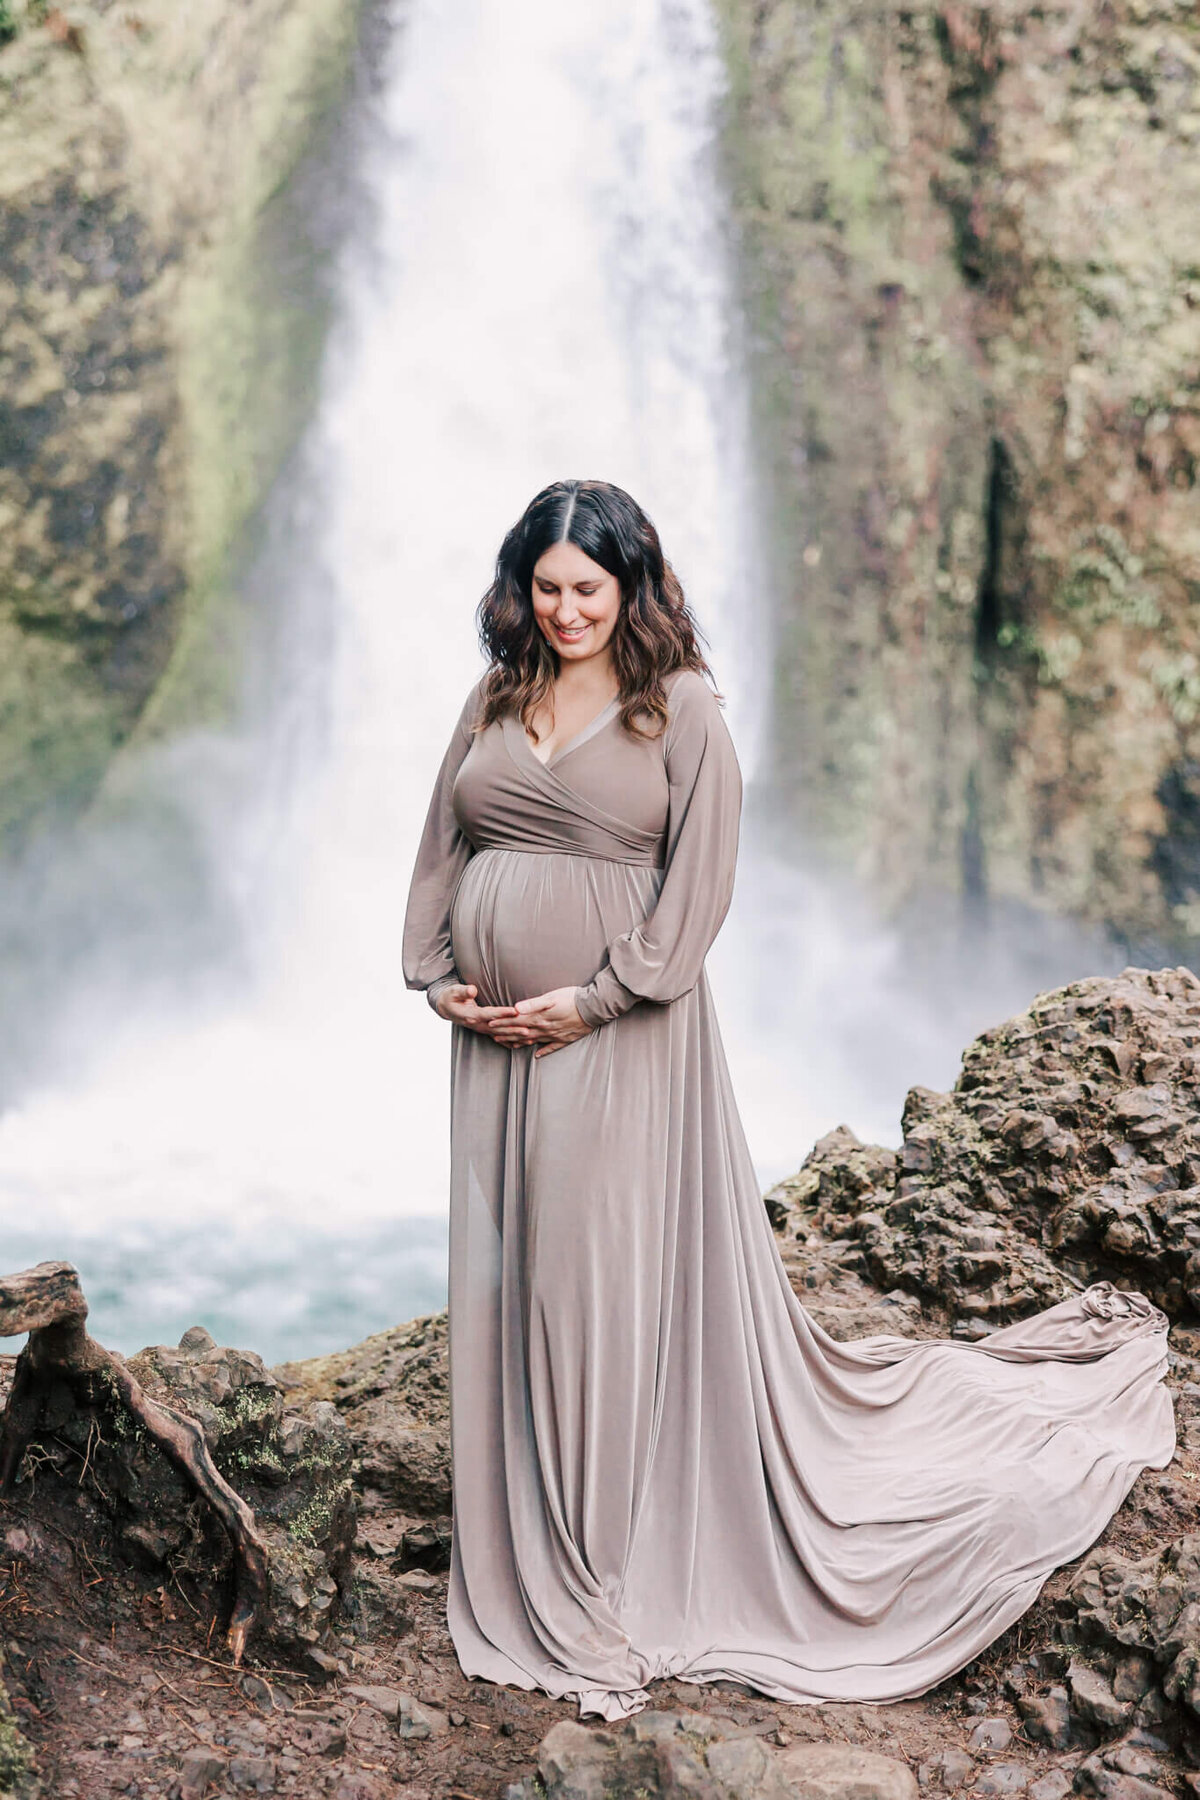 pregnant woman holding belly standing in front of wahclella falls in the columbia river gorge in oregon. she is wearing a tan dress.